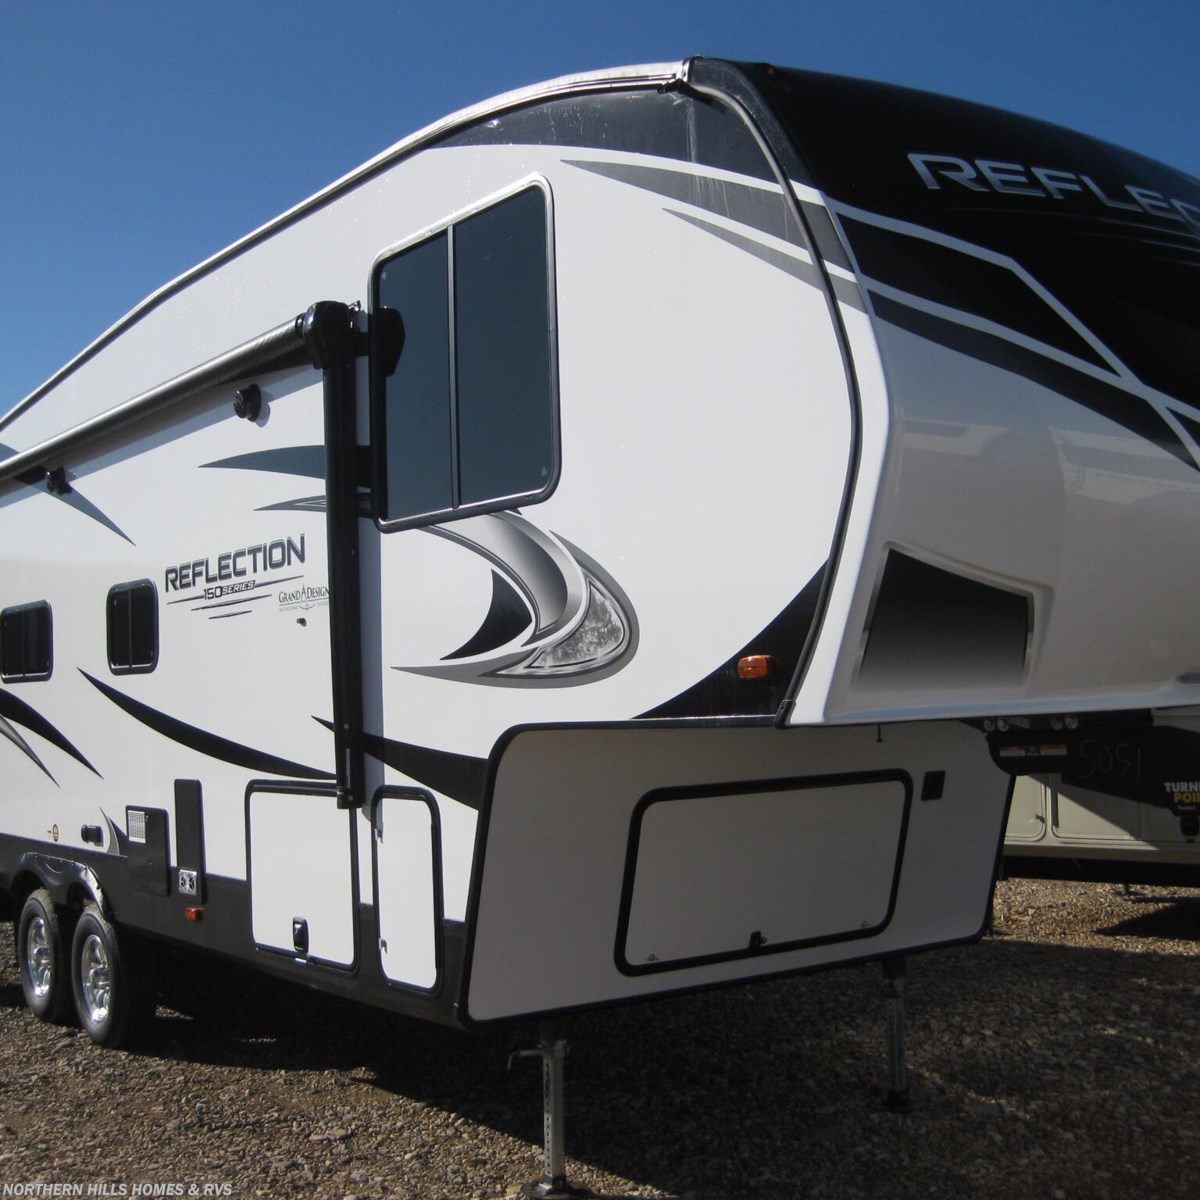 Gdr60 Grand Design Reflection 150 Series 268bh Fifth Wheel For Sale In Whitewood Sd